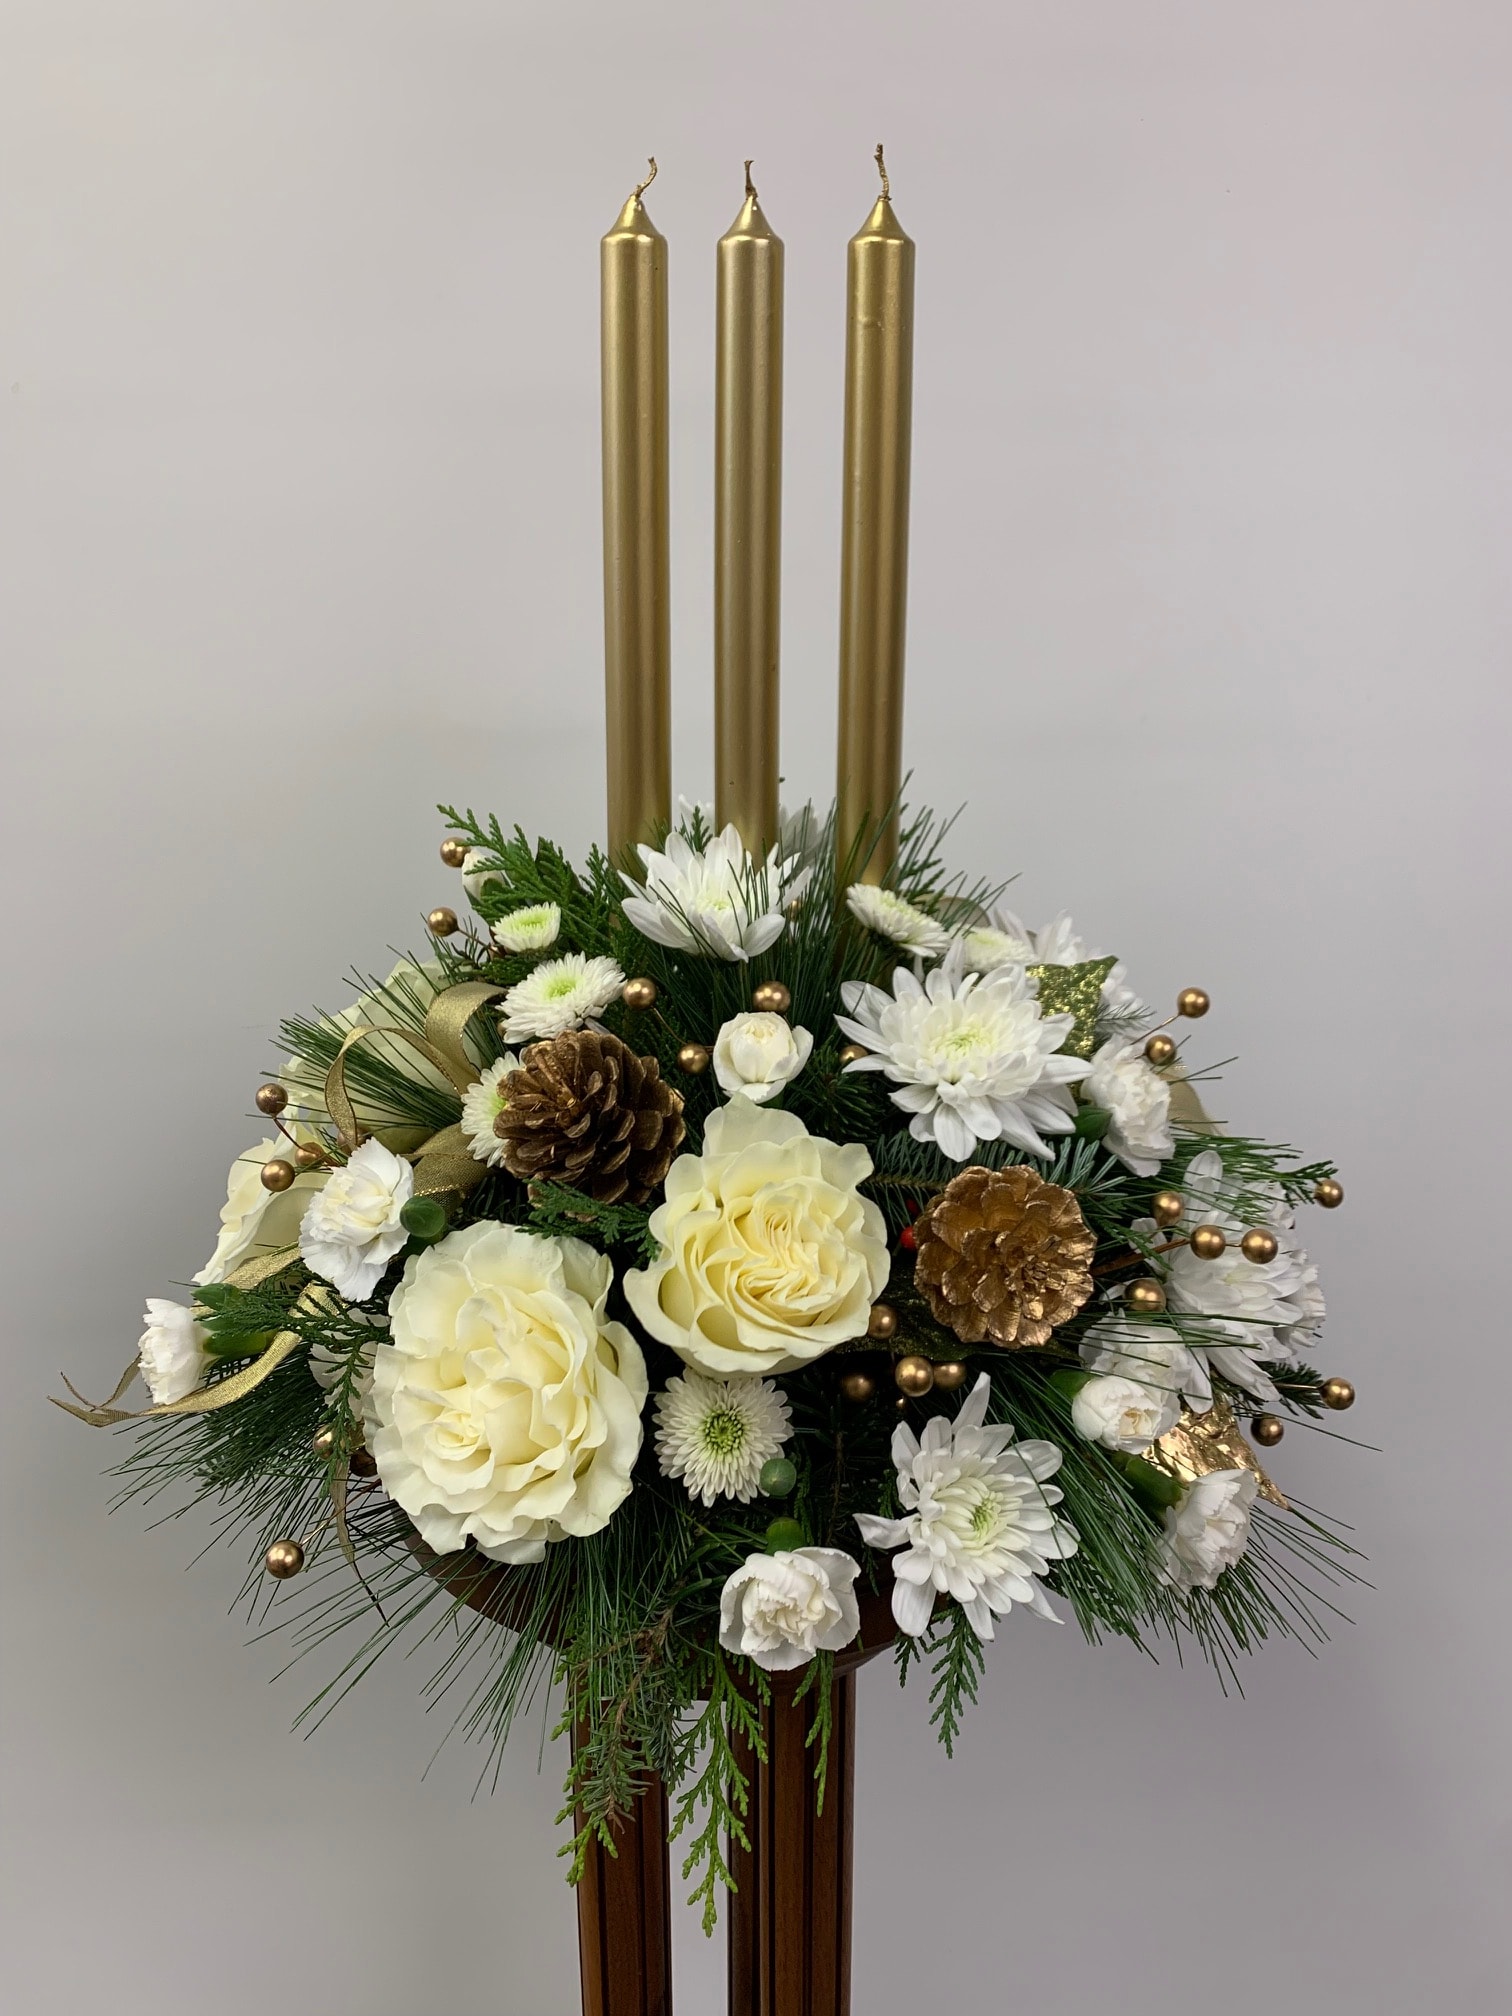 Golden Glow Centerpiece - Stunning centerpiece with evergreens, assorted white flowers, pinecones and taper candles. Candle color may vary.